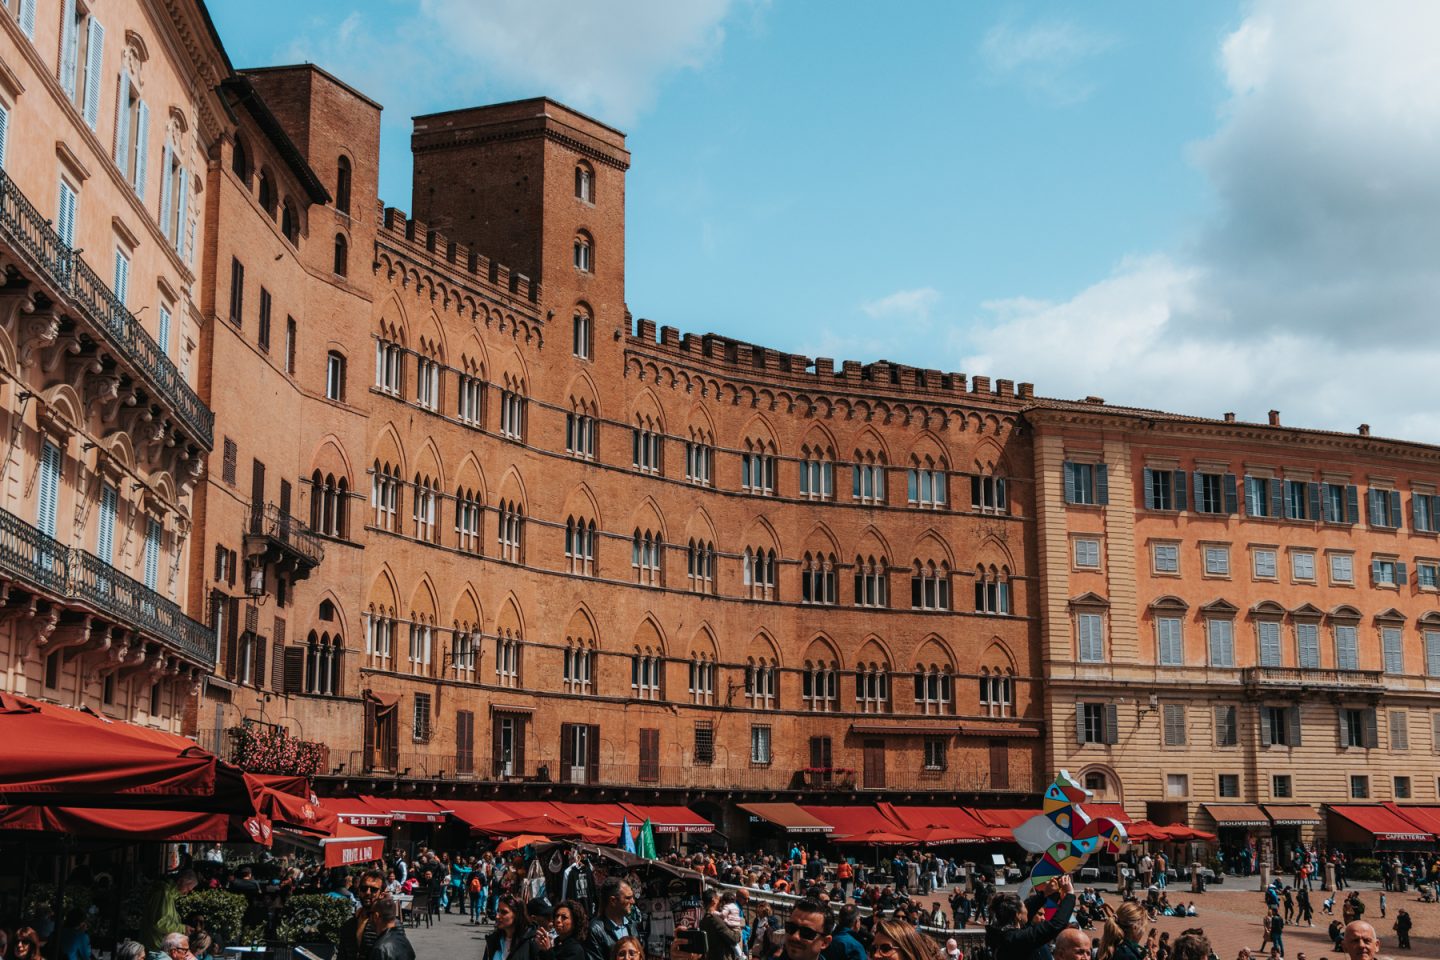 Medieval buildings curved around the Piazza del Campo, Siena